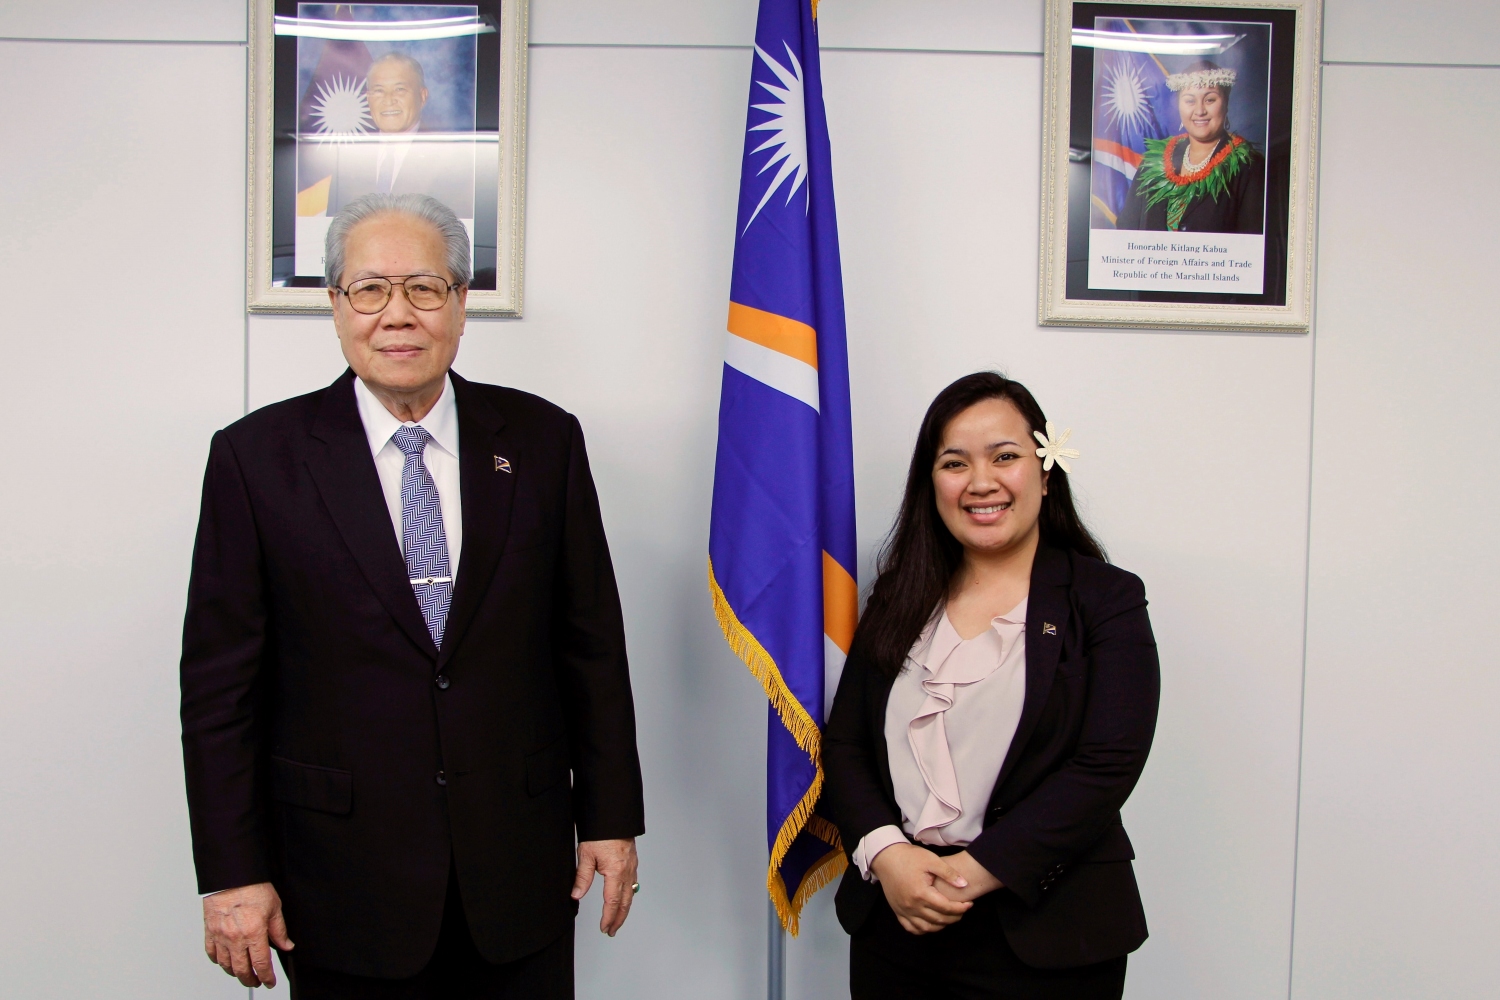 Interview: H.E. Mr. Alexander Carter BING, Ambassador of the Republic of the Marshall Islands to Japan